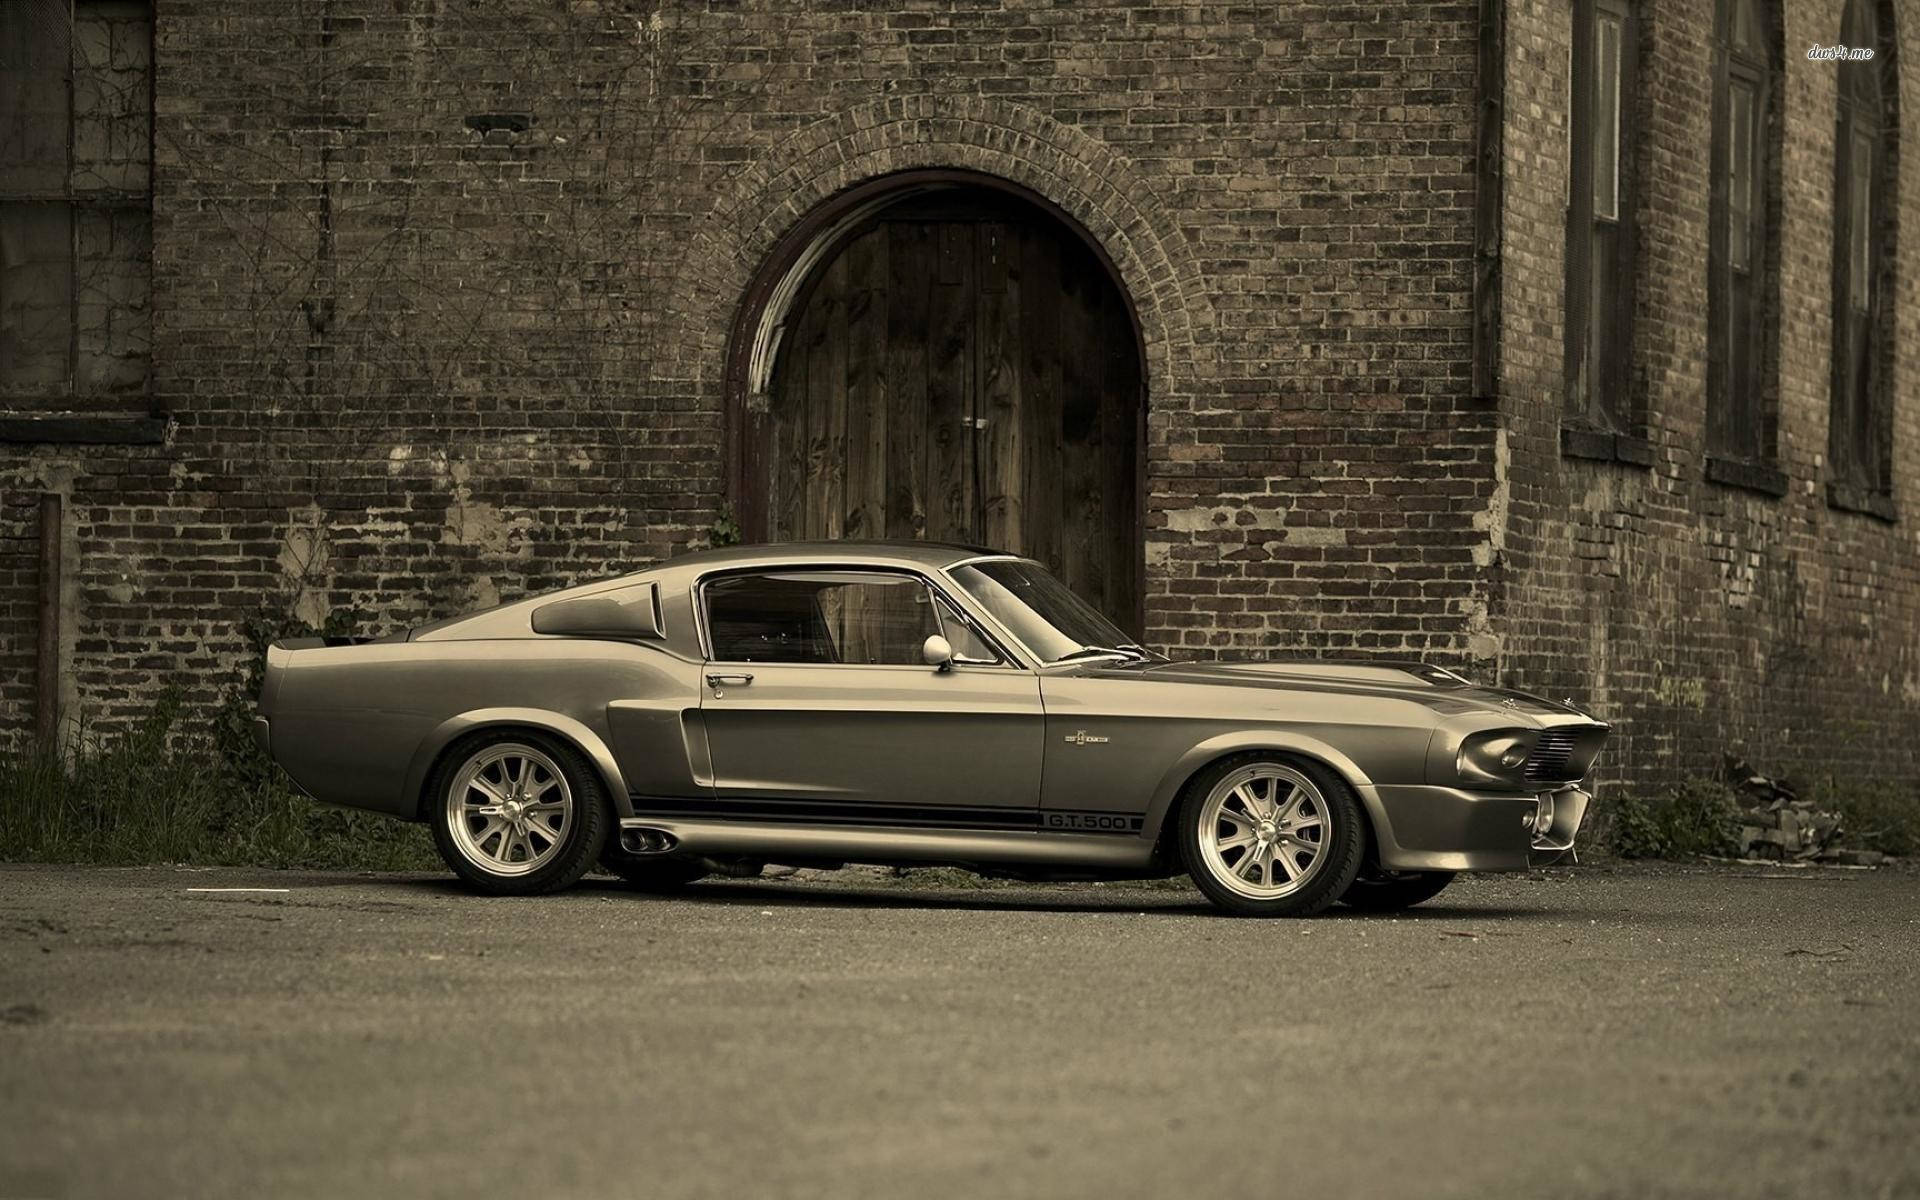 Ford Mustang Hd Brick Building Background